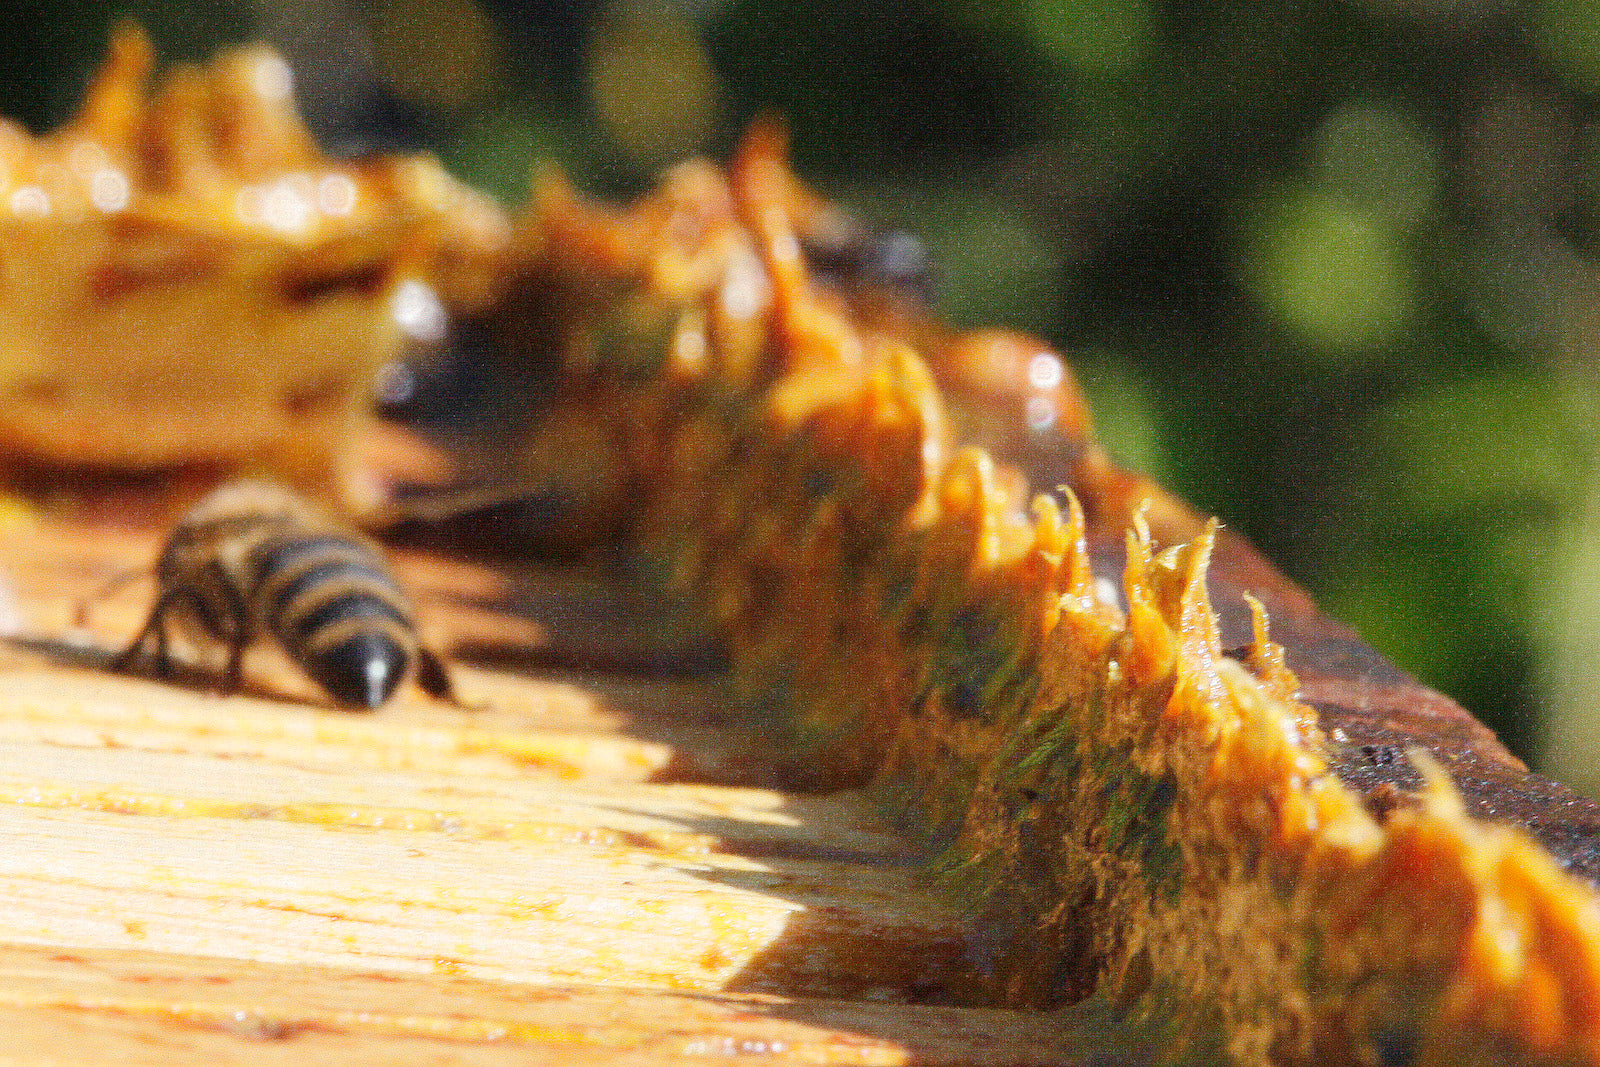 propolis on hive with bee nearby